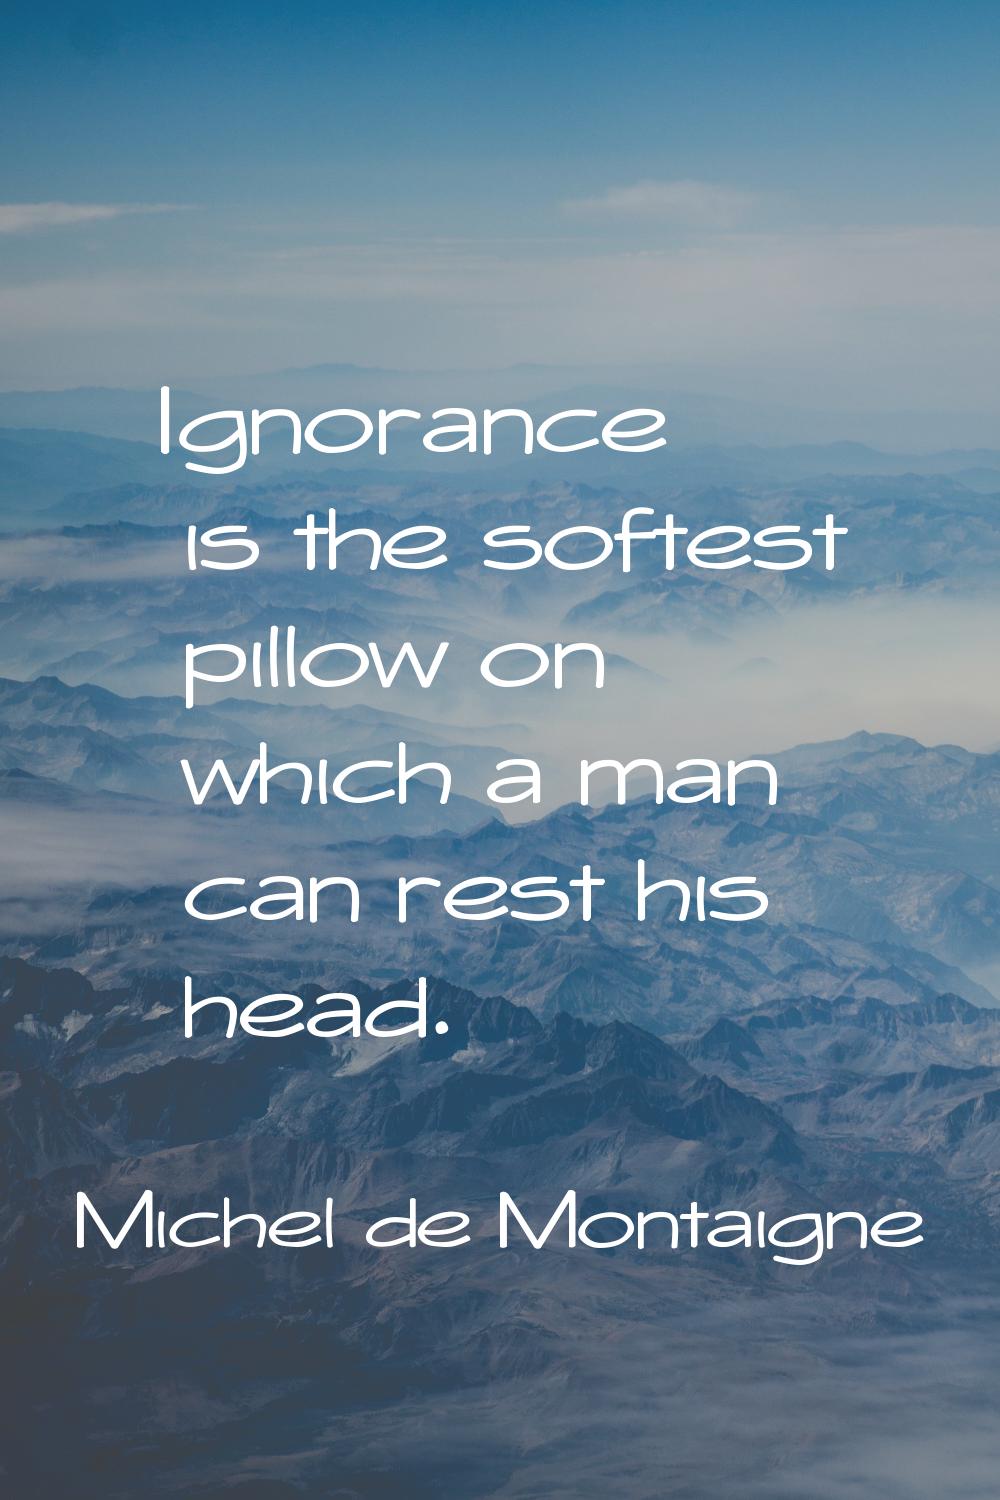 Ignorance is the softest pillow on which a man can rest his head.